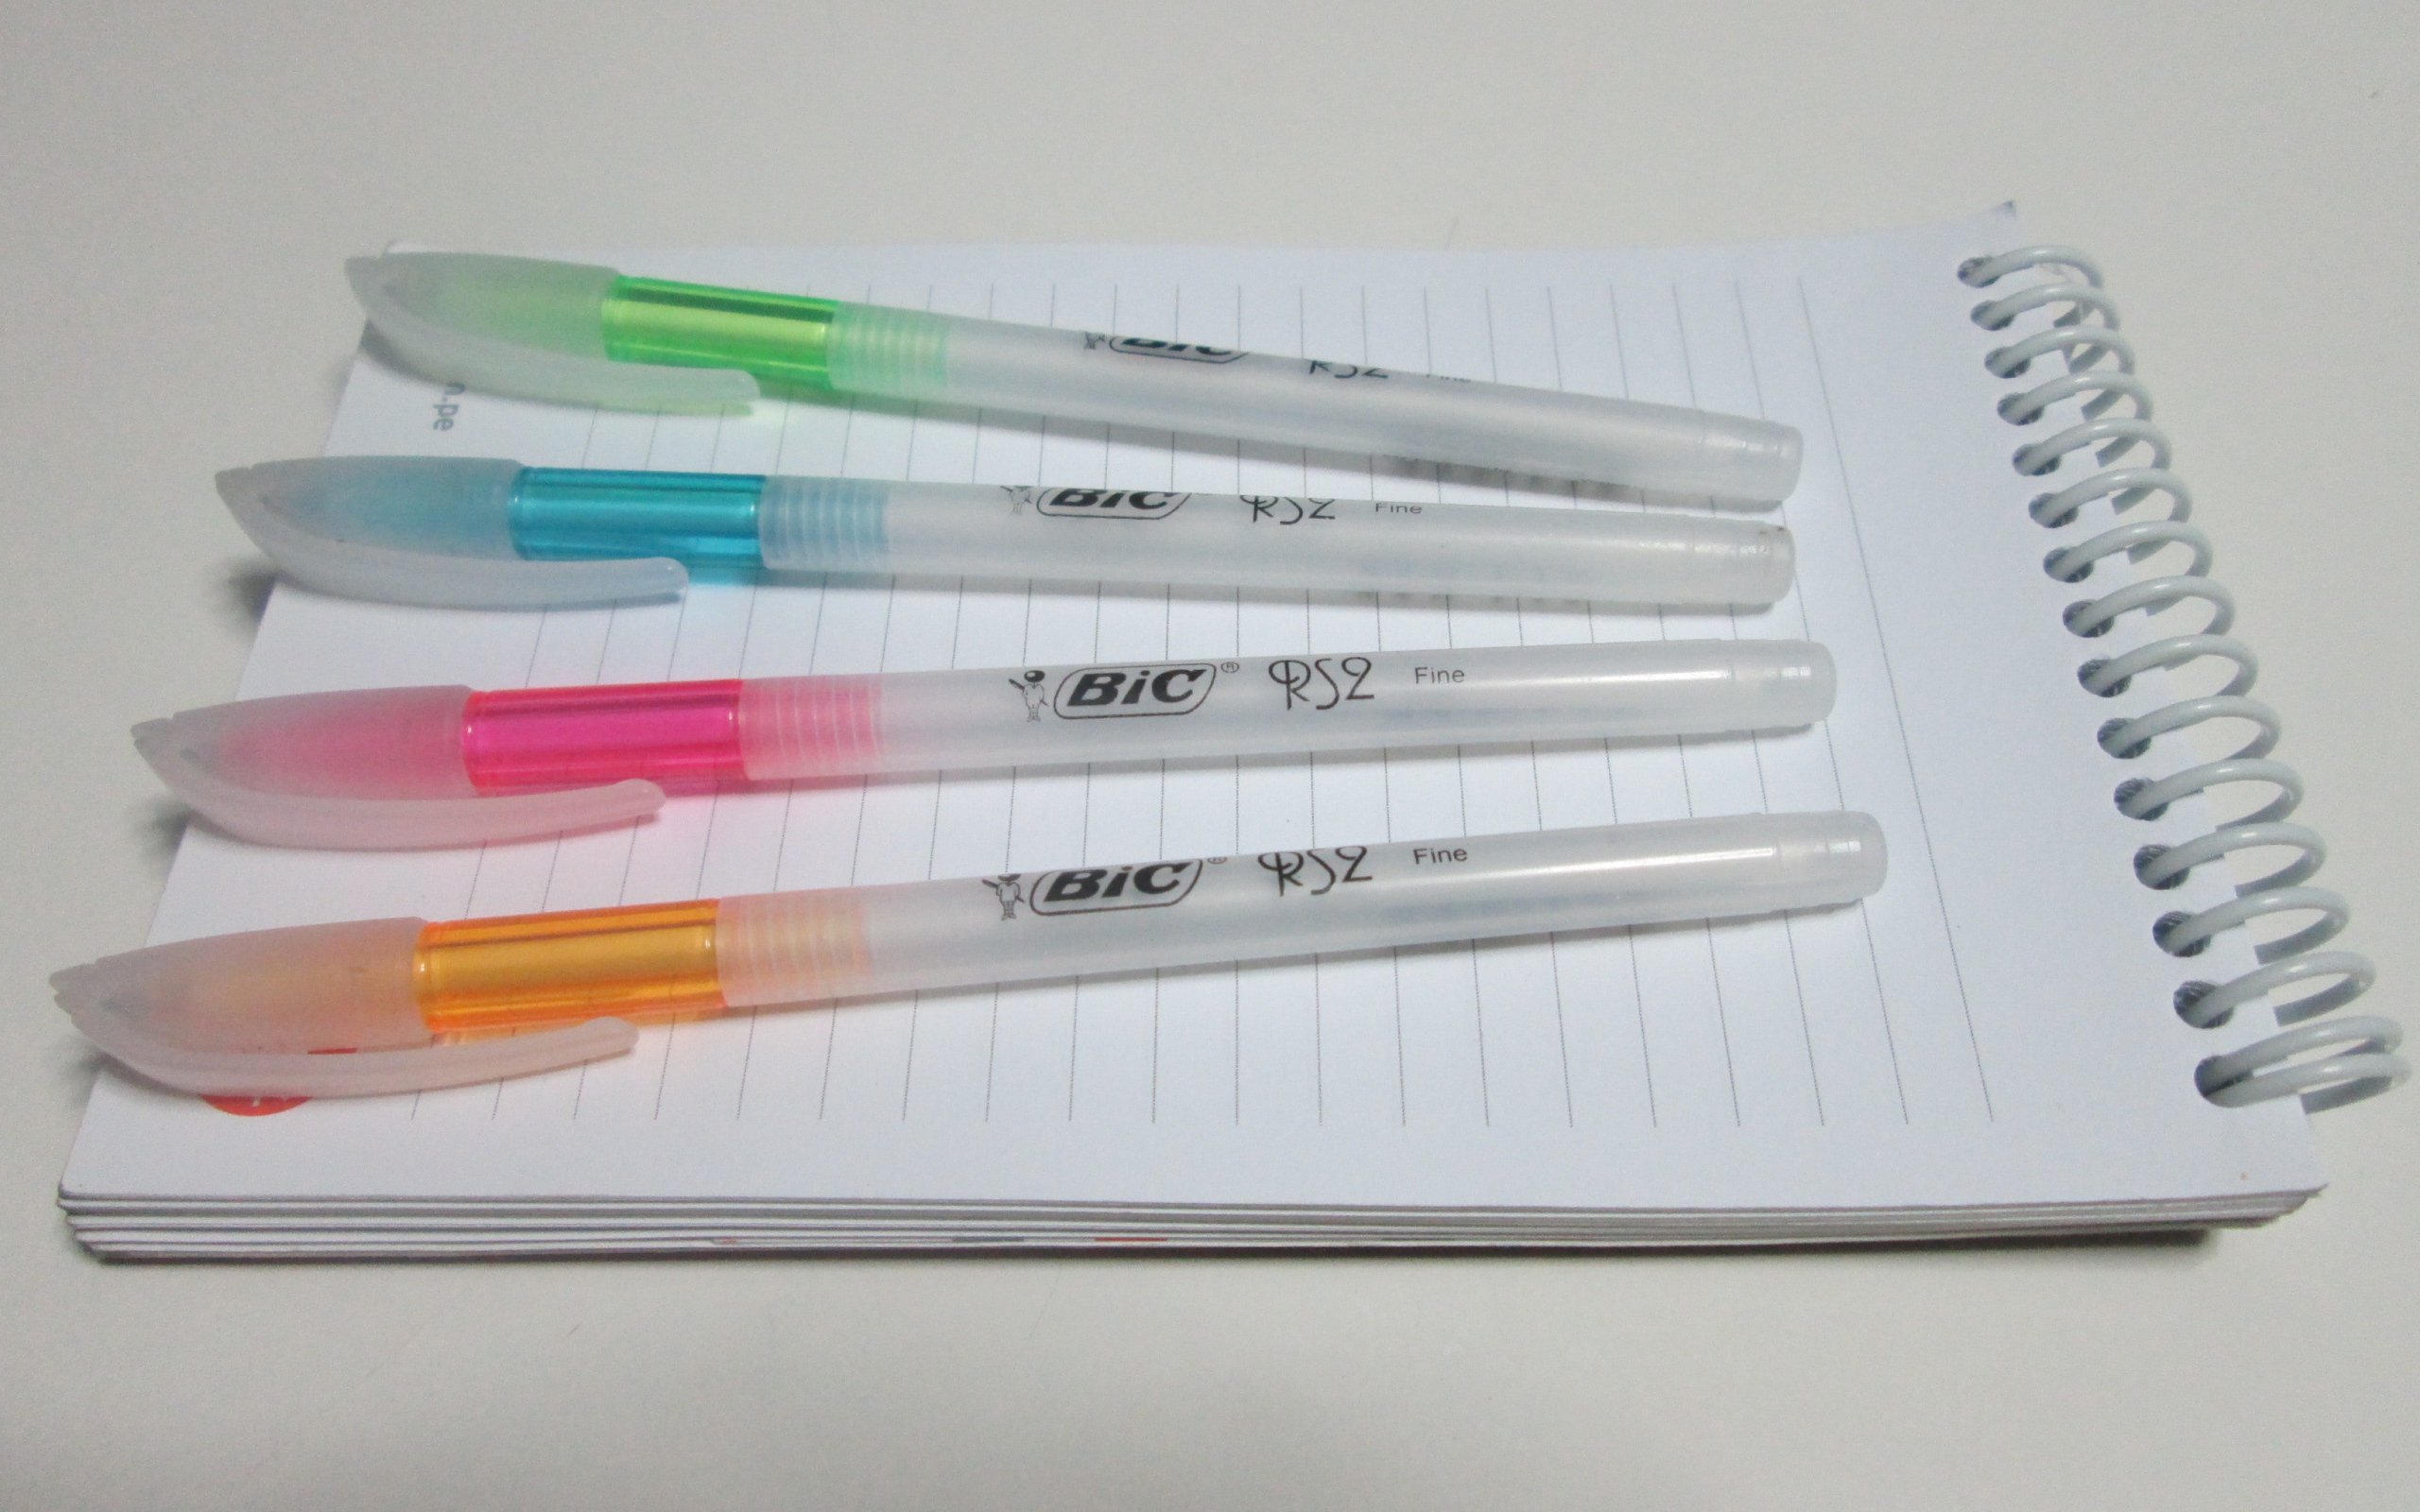 Multi-colored pens lie on a notebook on a white background